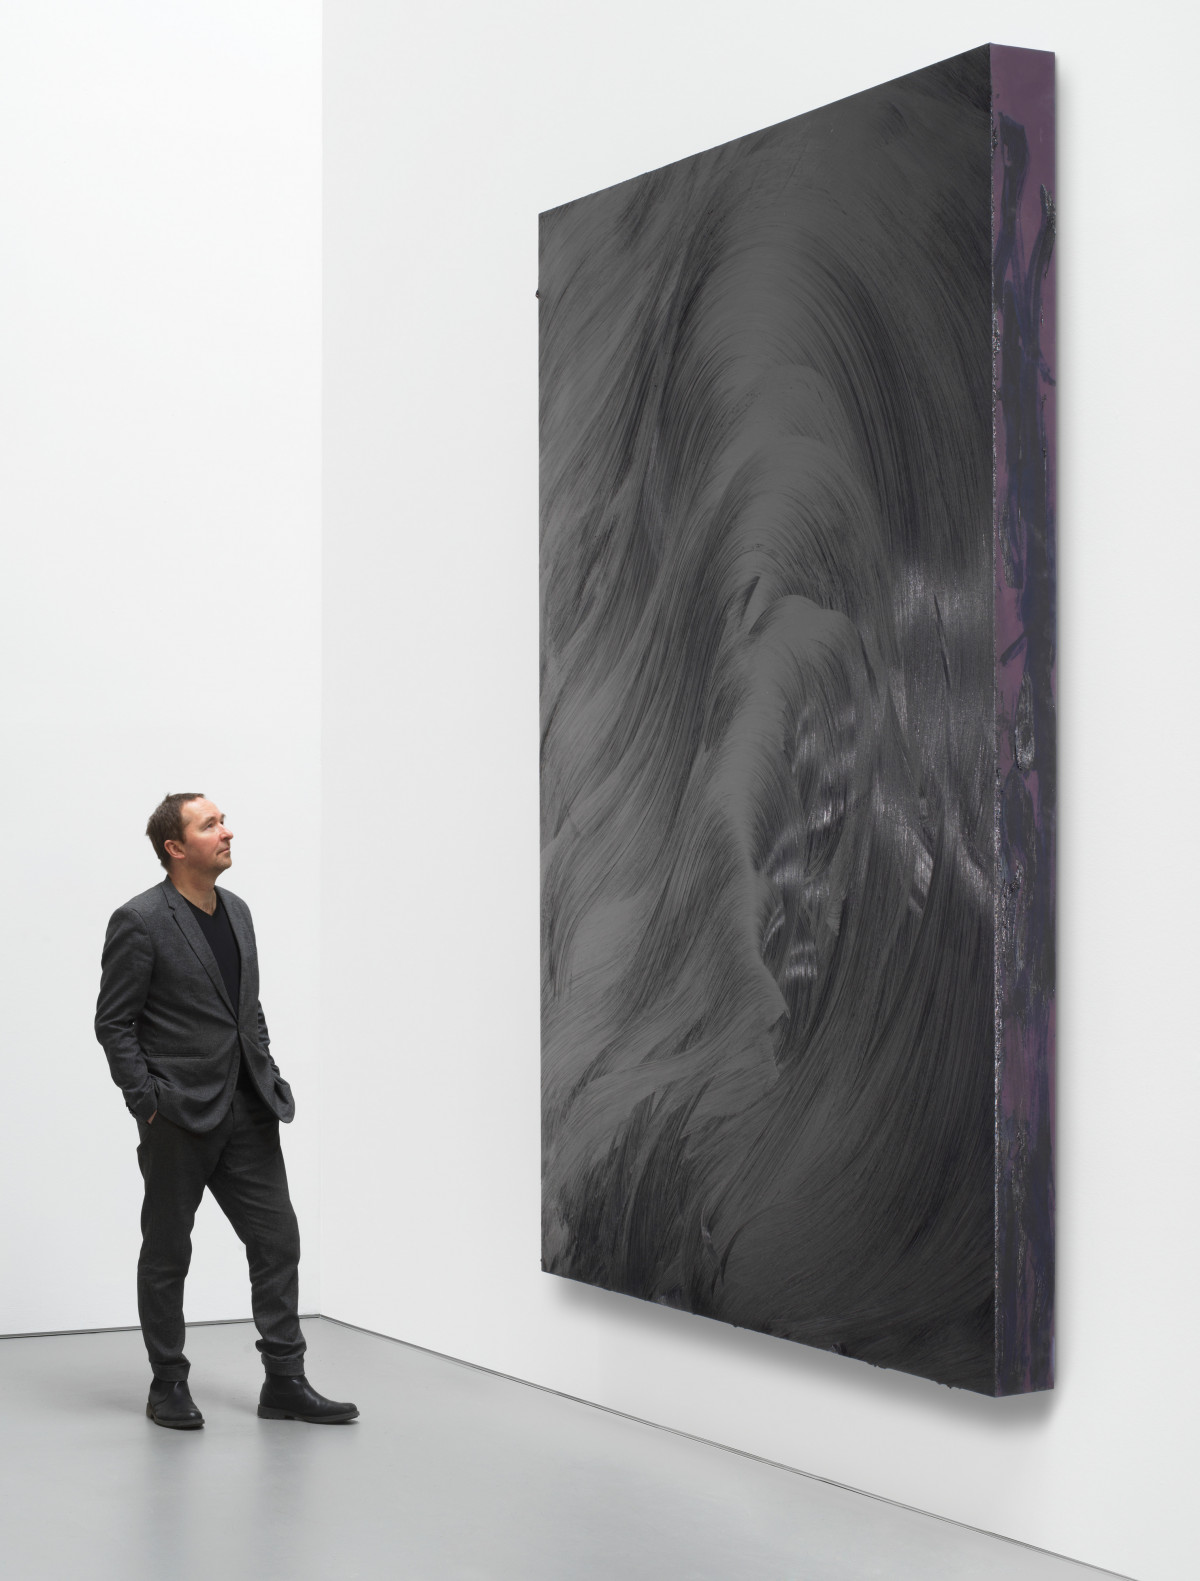 A large black painting by the british artist with a person standing next to it.